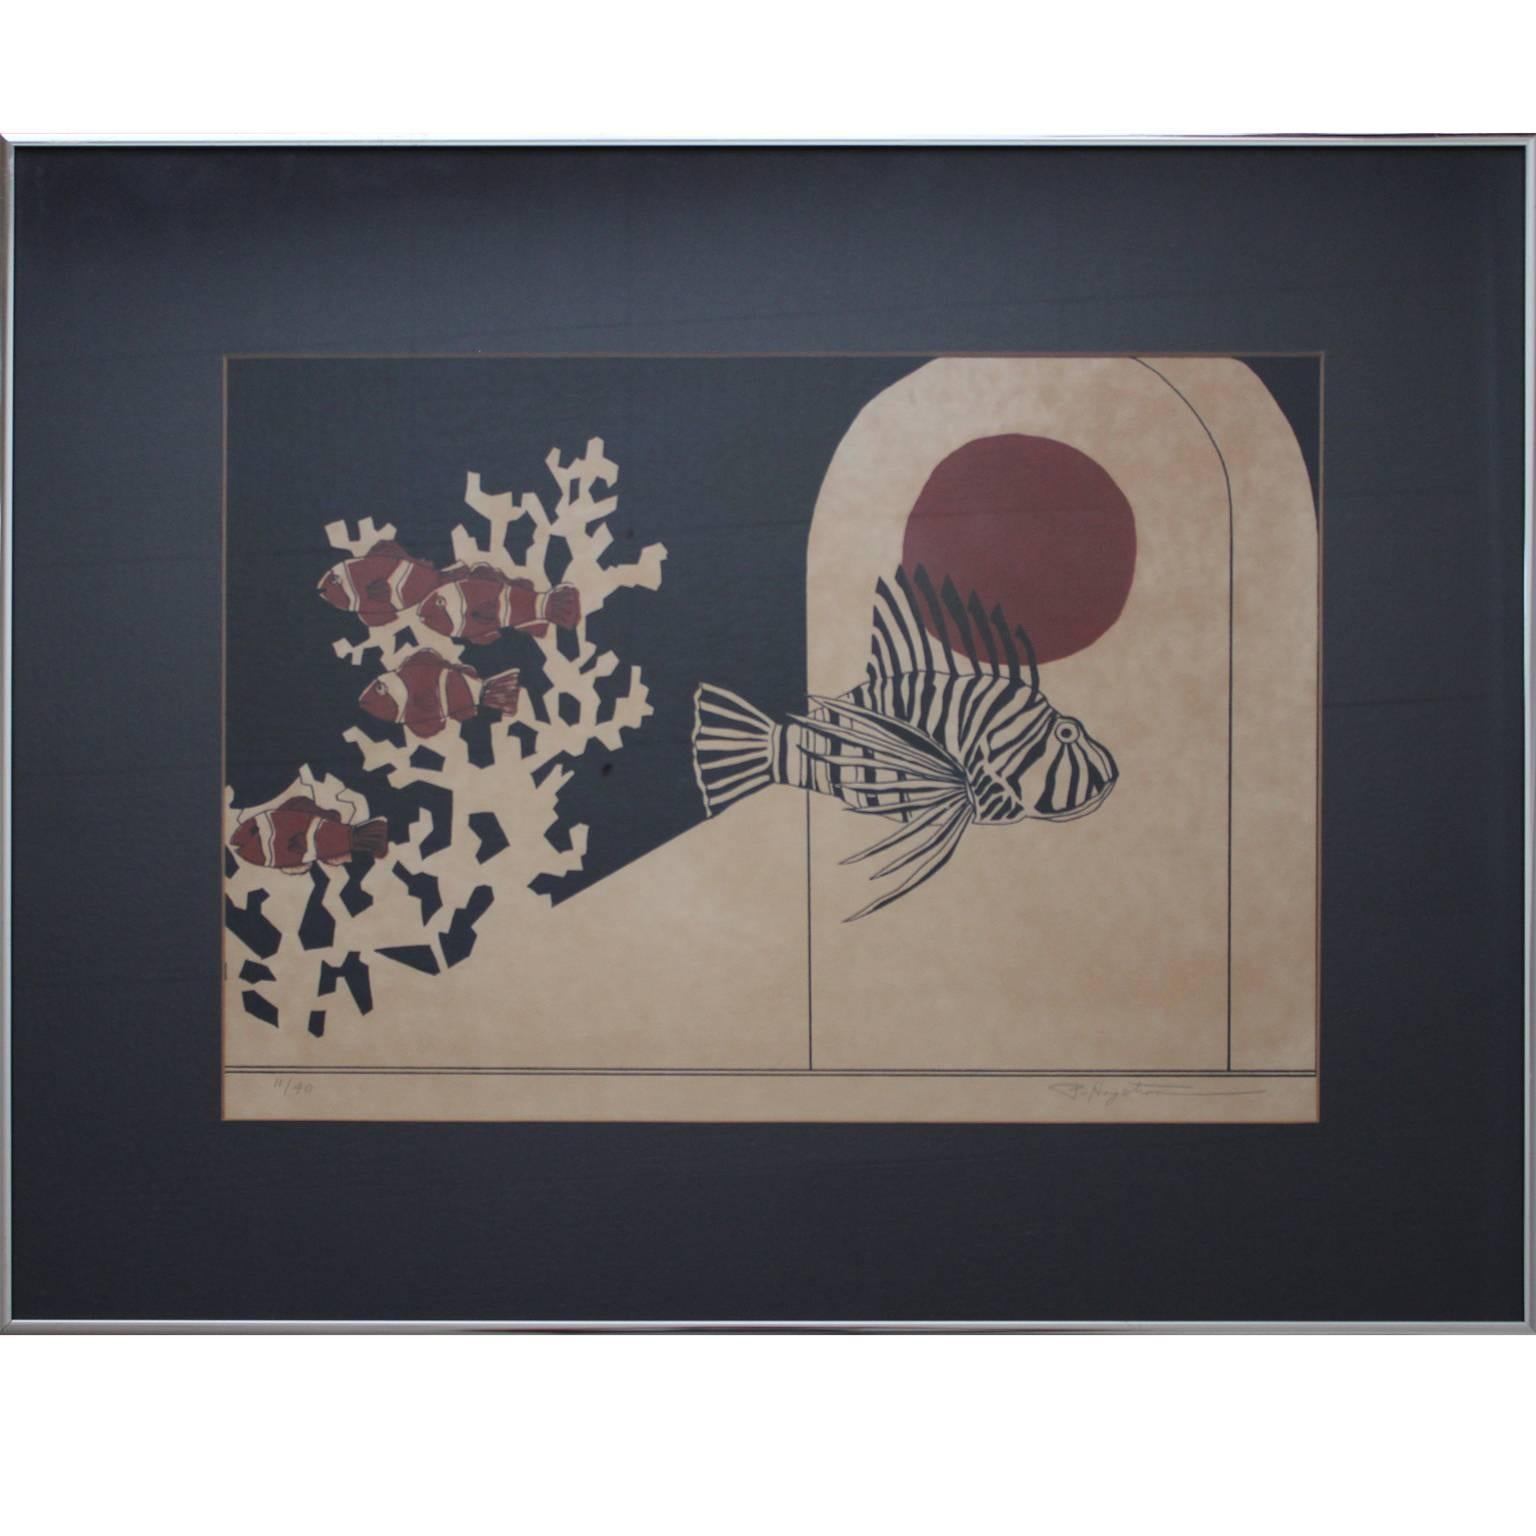 Patricia Hagstrom Animal Print - Black, Red, and White Aquatic Print of a School of Clown Fish and a Lion Fish